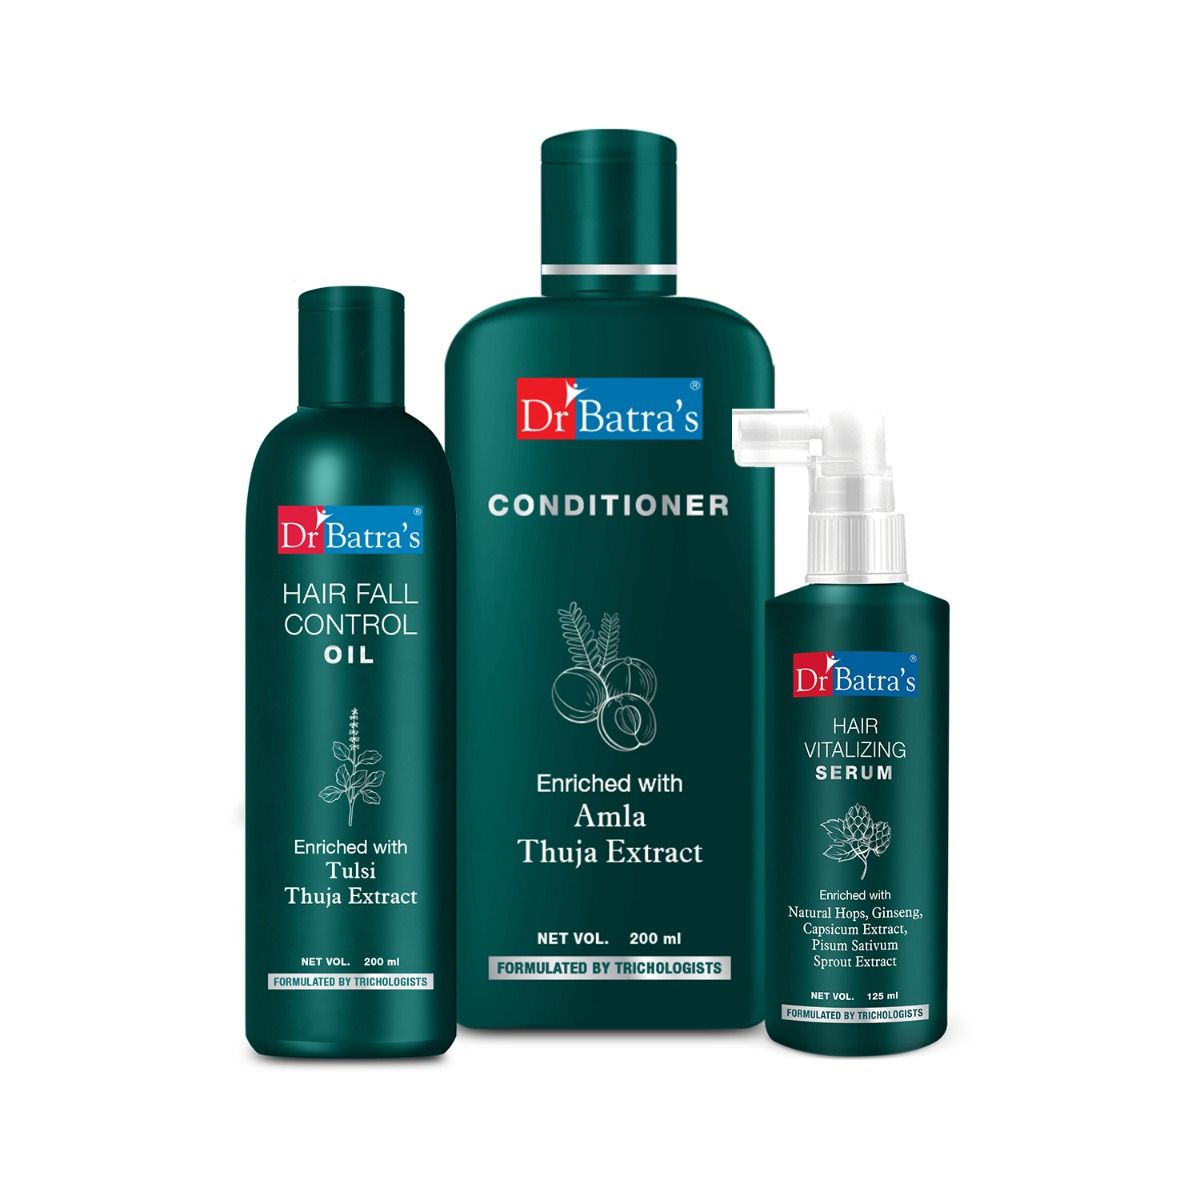     			Dr Batra's Hair Vitalizing Serum, Conditioner And Hair Fall Control Oil (Pack Of 3)